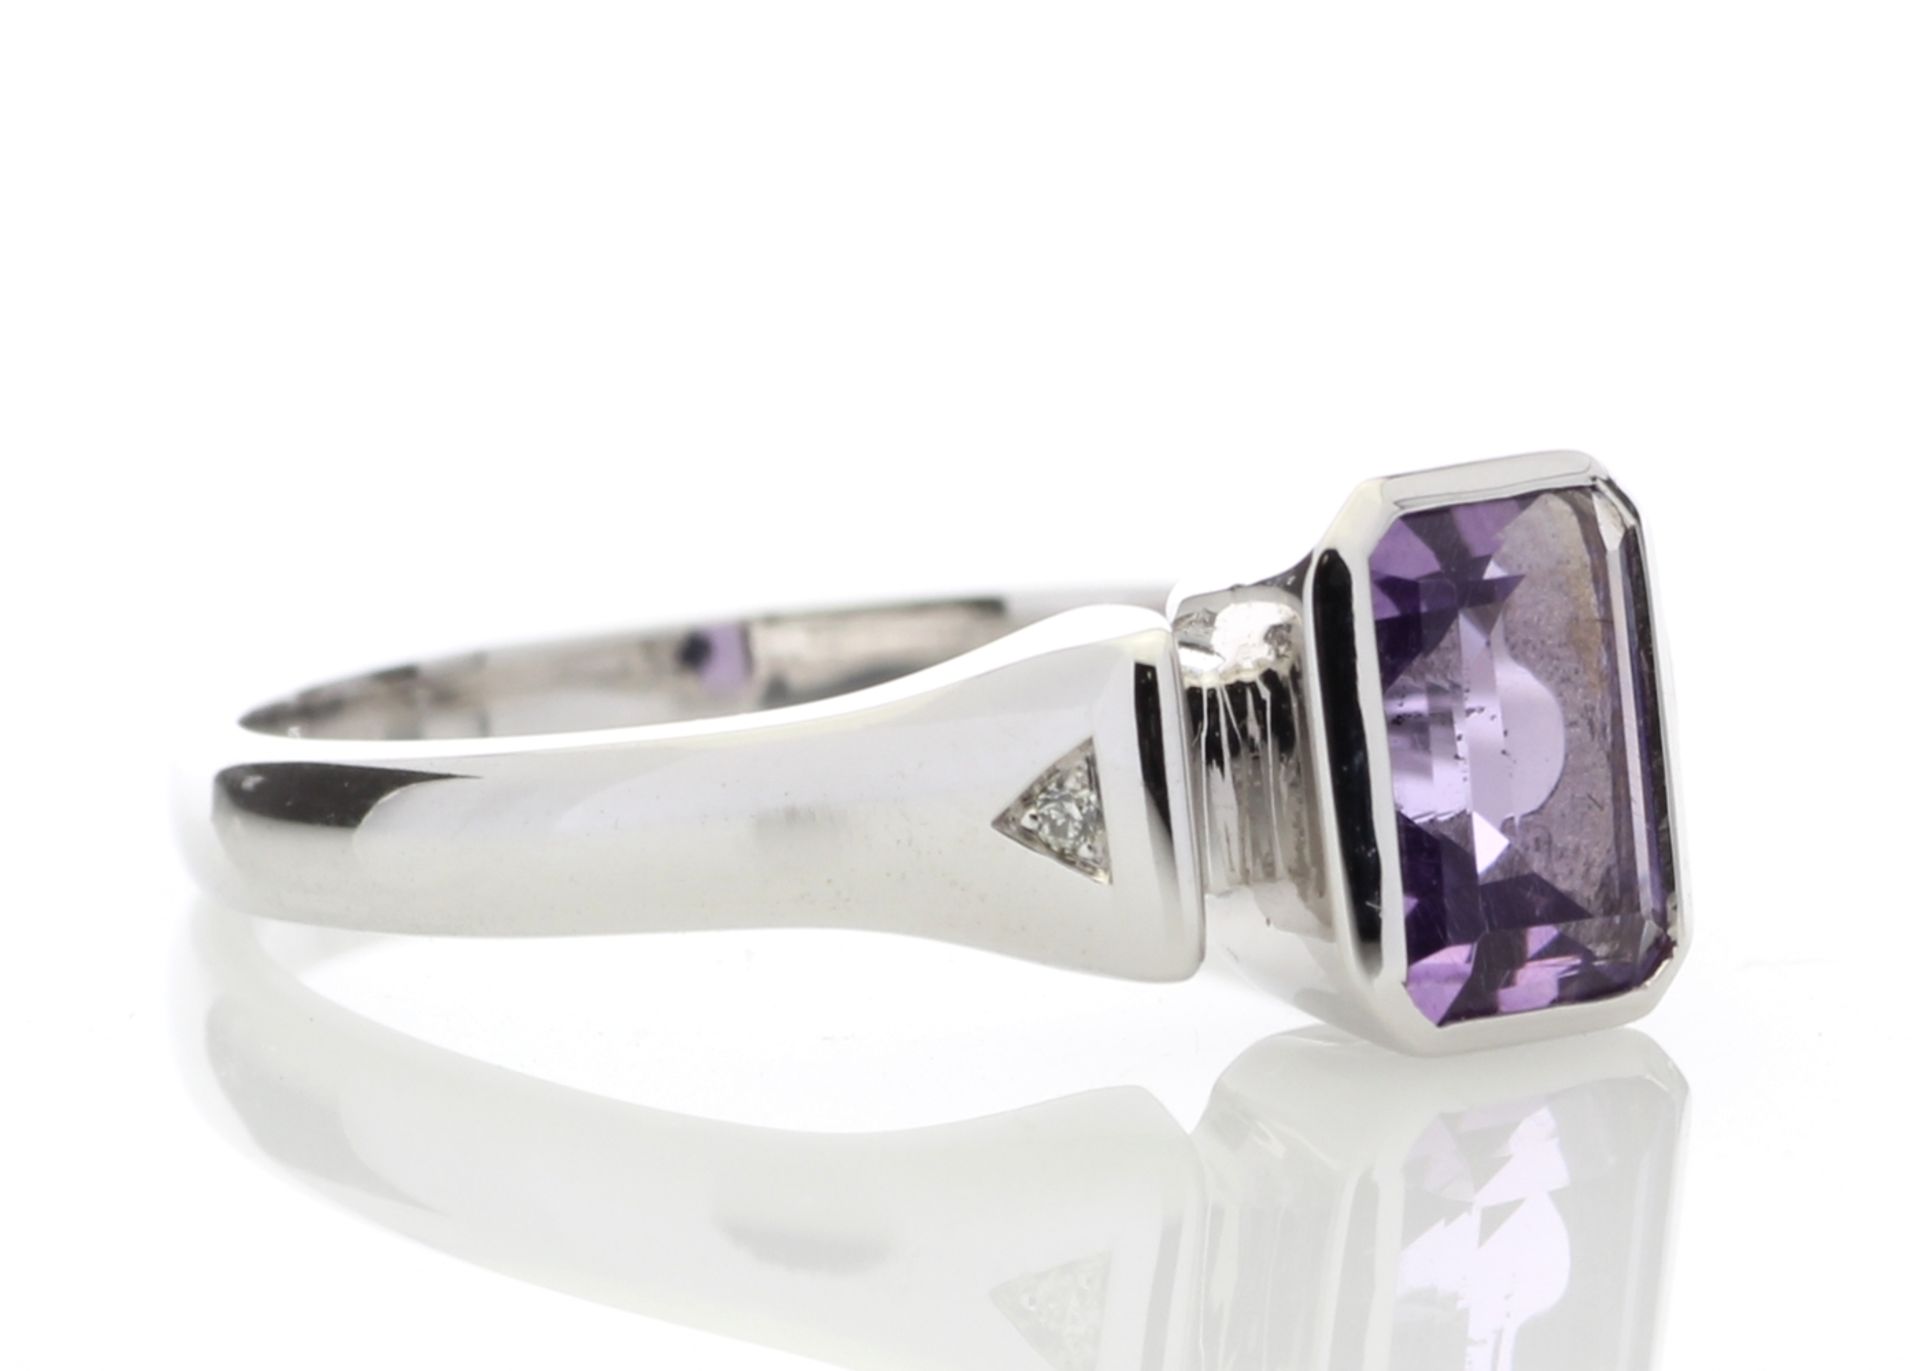 9ct White Gold Amethyst Ring 0.99 Carats - Valued by AGI £790.00 - 9ct White Gold Amethyst Ring 0.99 - Image 3 of 4